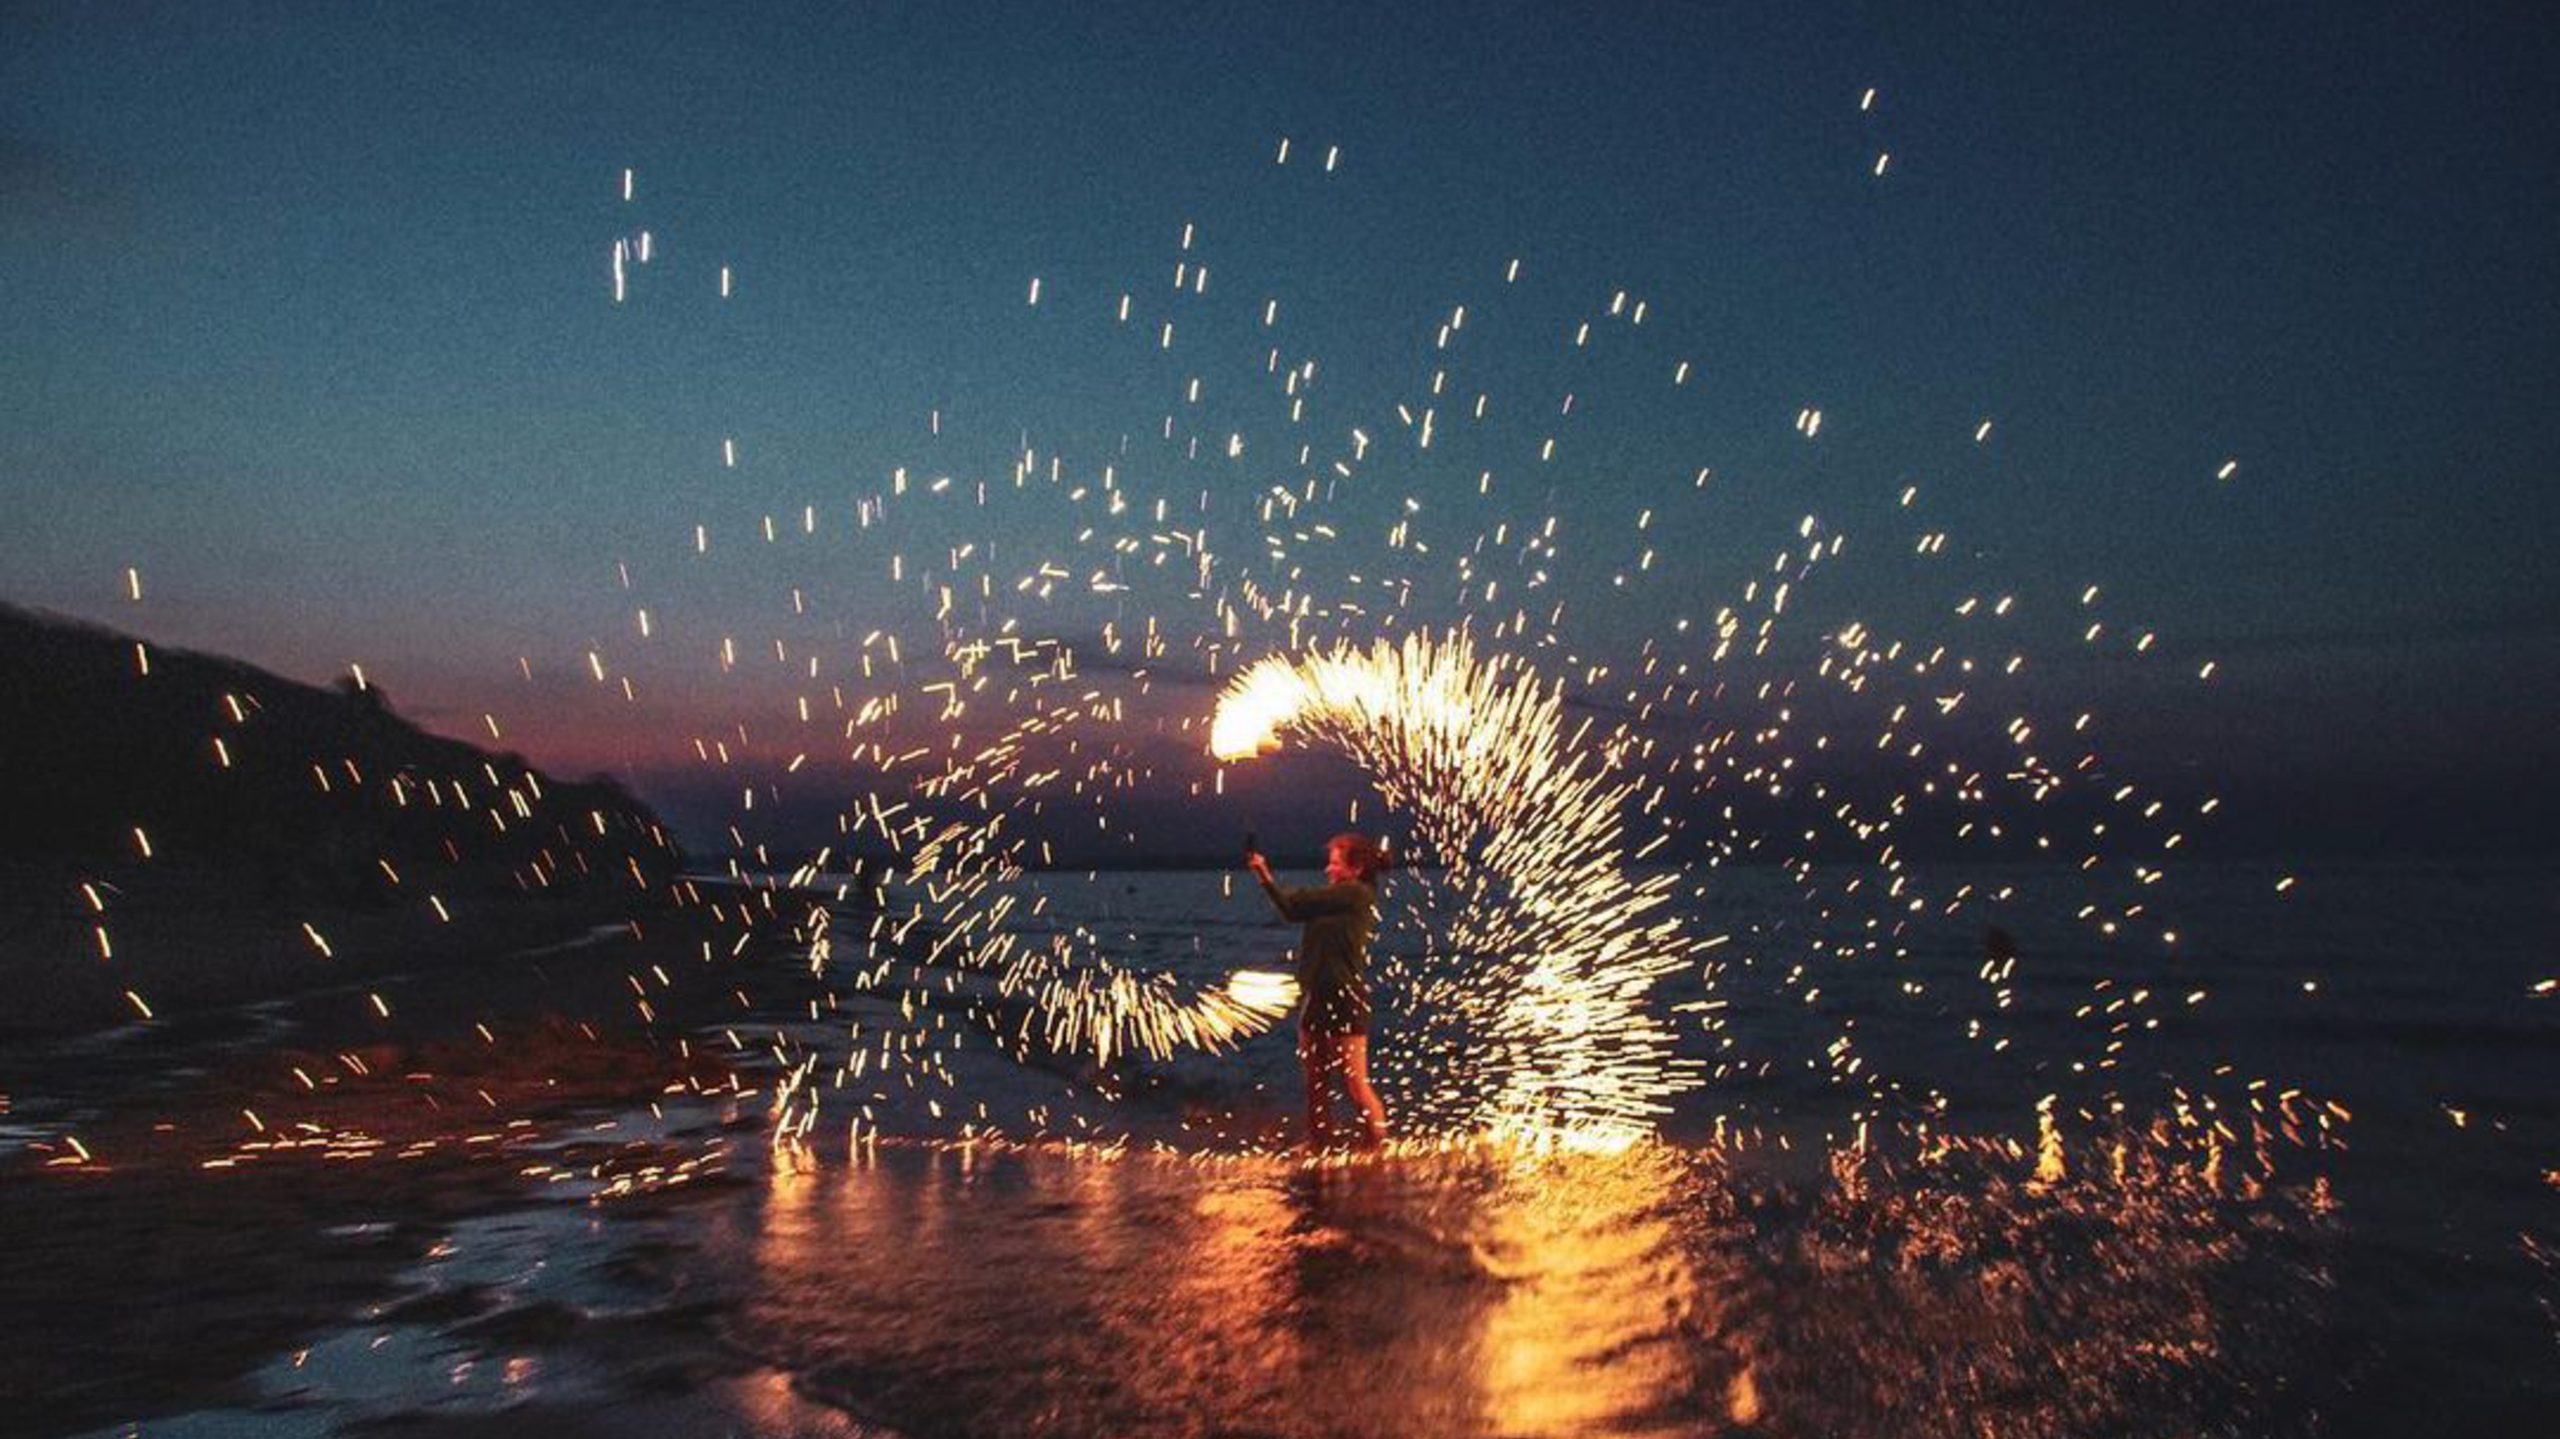 Firepoi at the beach, Photo by Kaufner